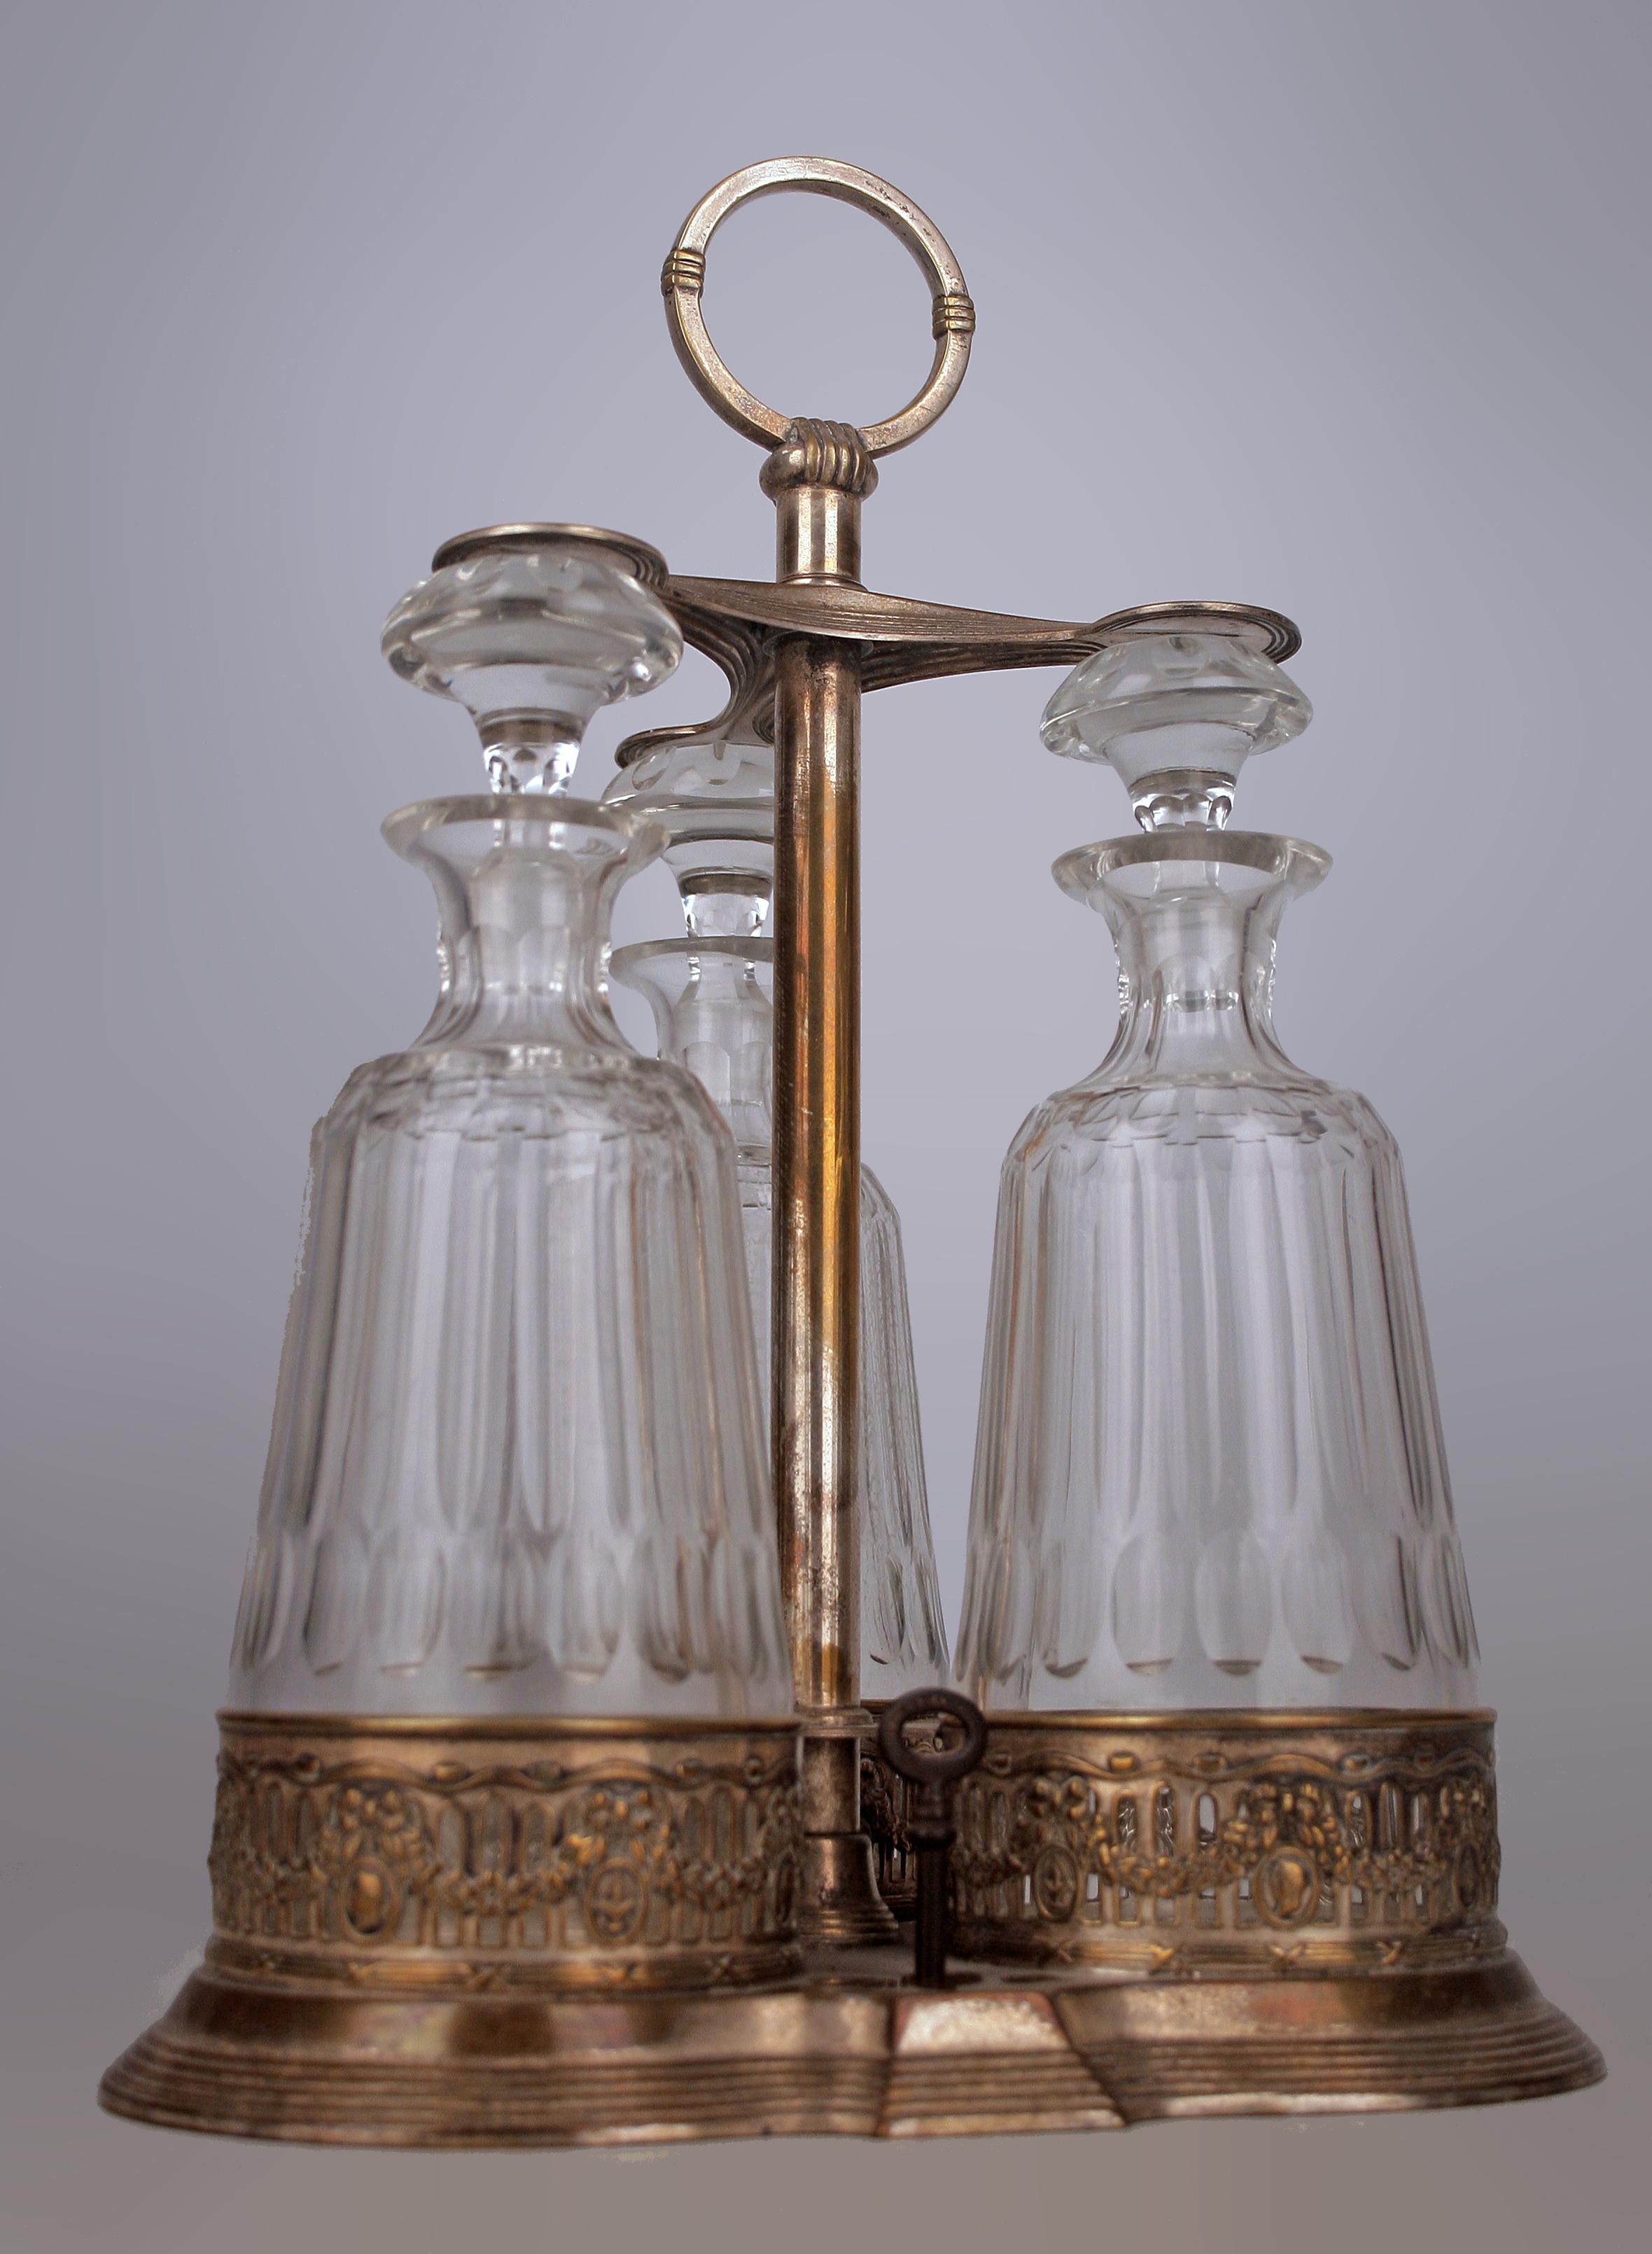 Jugendstil/Art Nouveau Set of Silver Tantalus and Three Glass Decanters with Stoppers by german company Württembergische Metallwarenfabrik (WMF)

By: Württembergische Metallwarenfabrik (WMF)
Material: silver, glass, cut glass, metal, crystal,